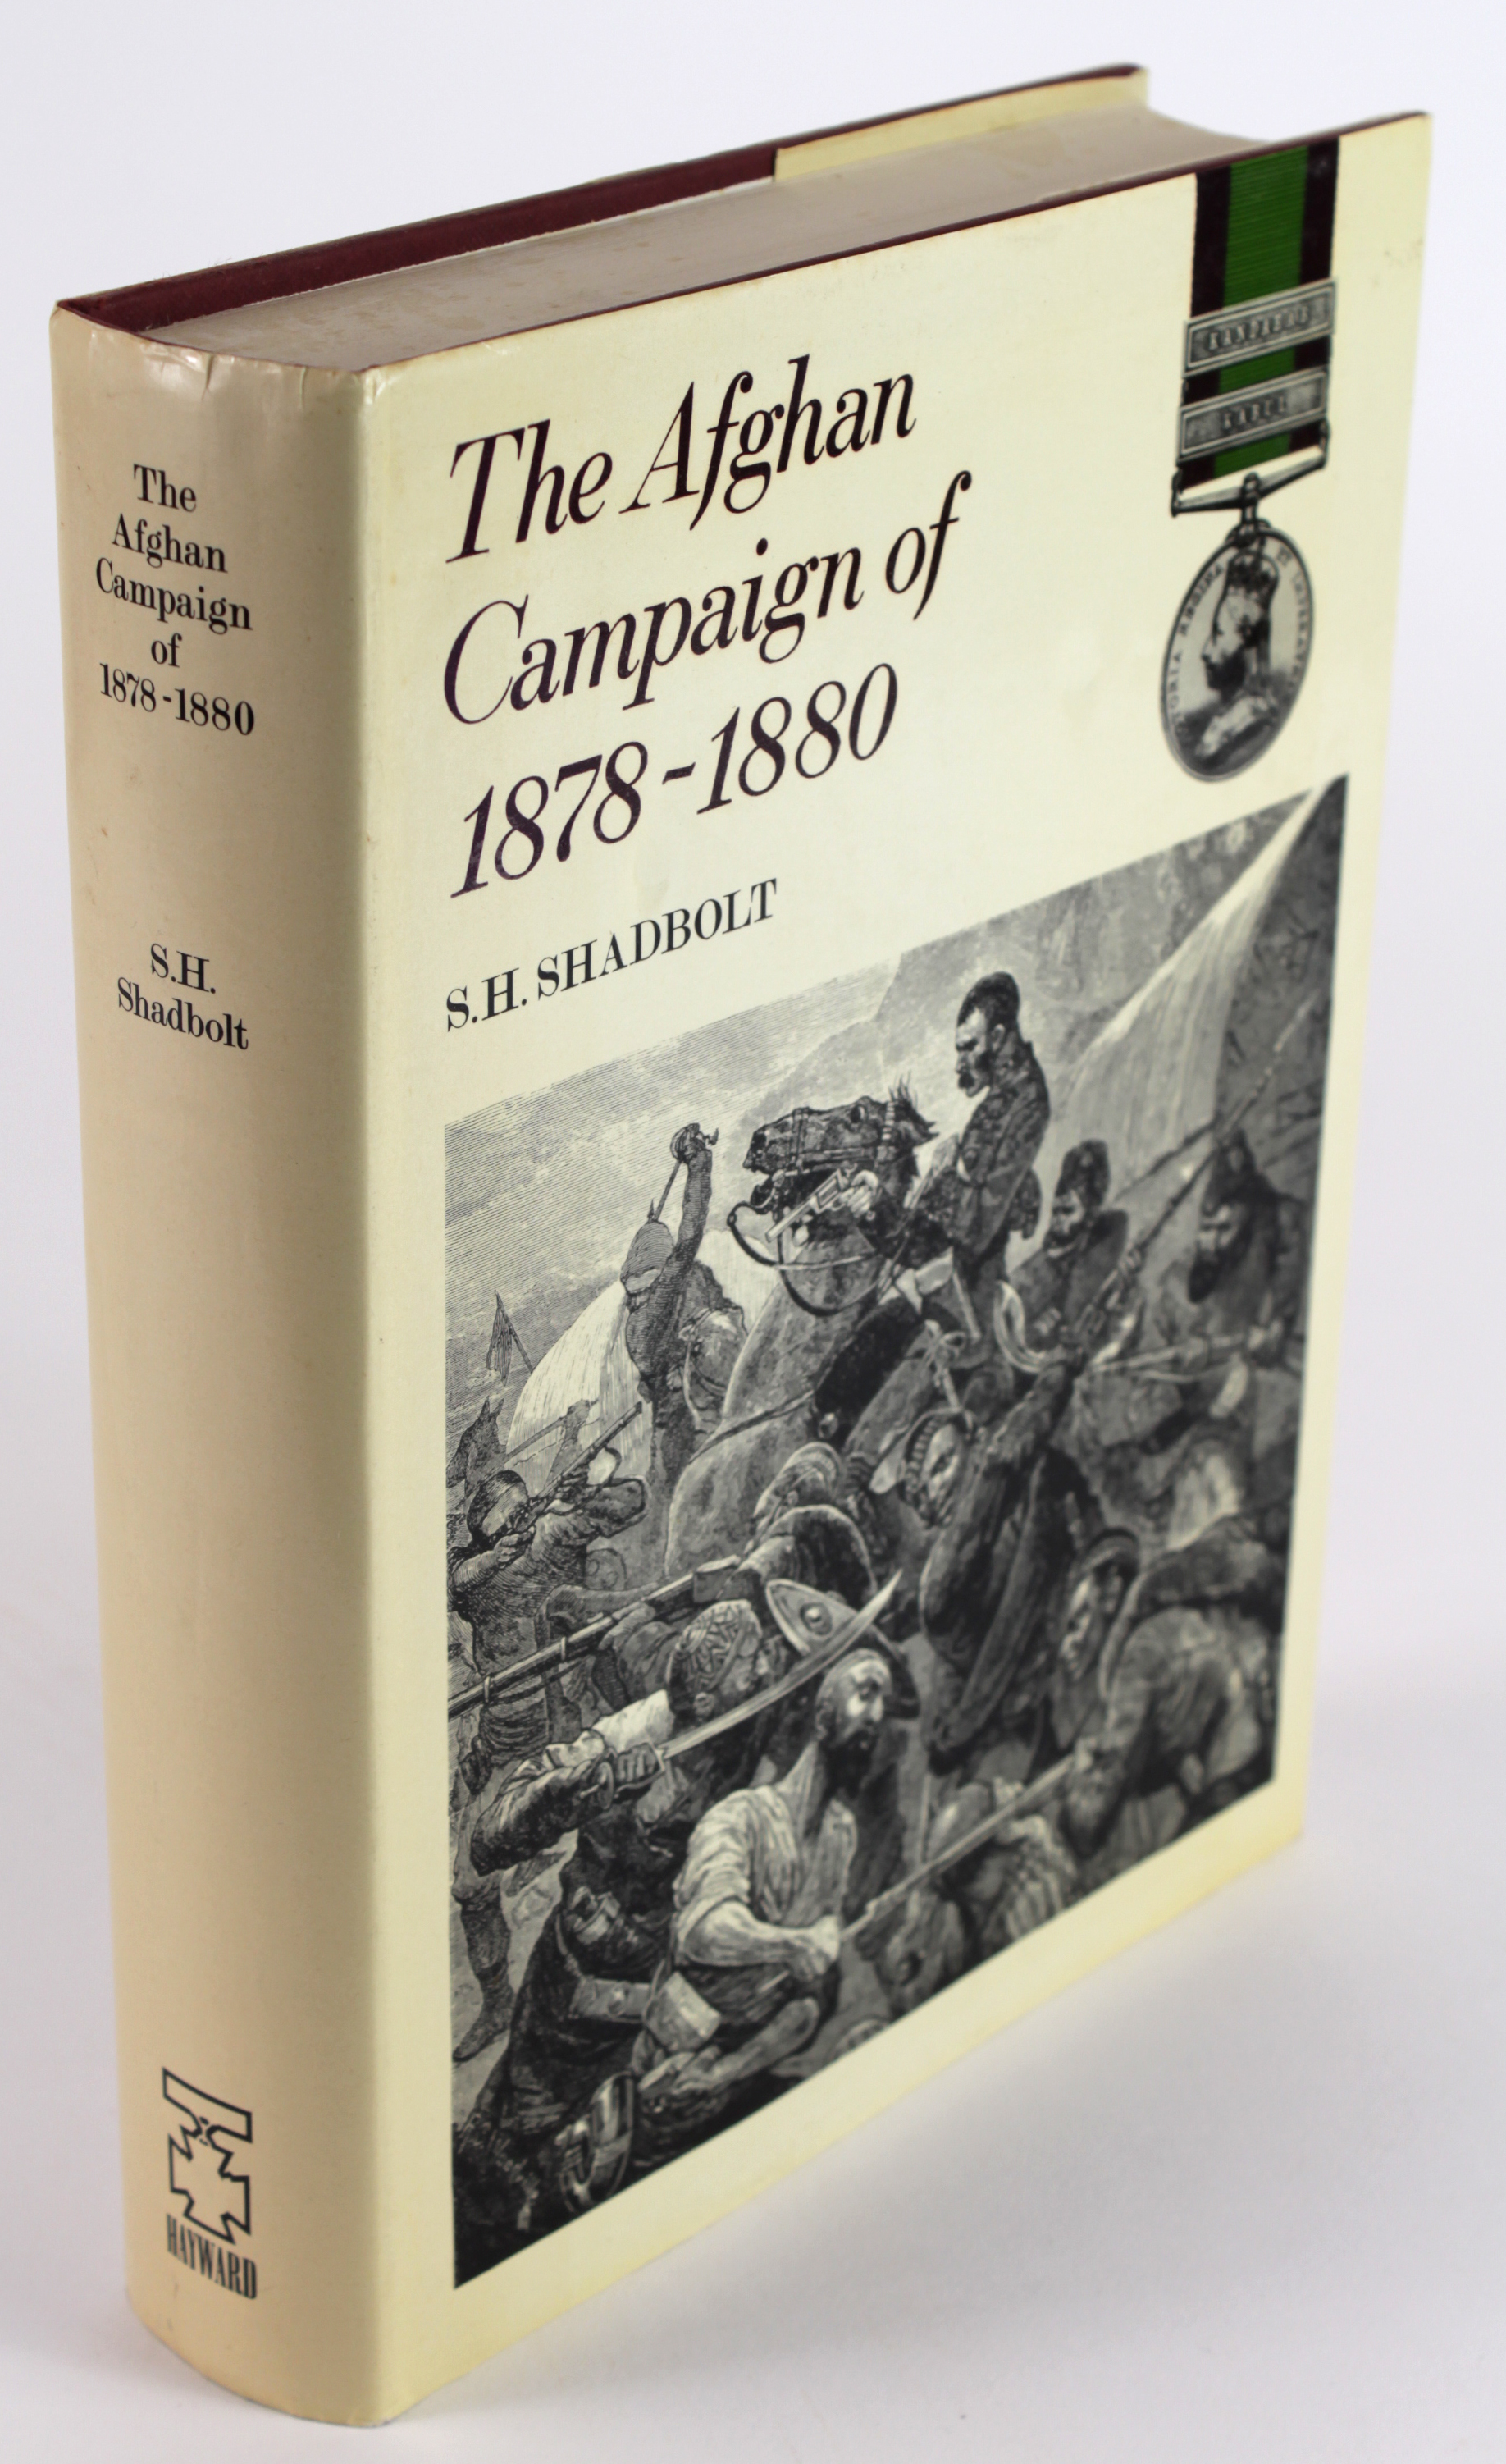 Afghan Campaign 1878-1880 book by Shadbolt, the bible on the campaign, awards and obituaries of